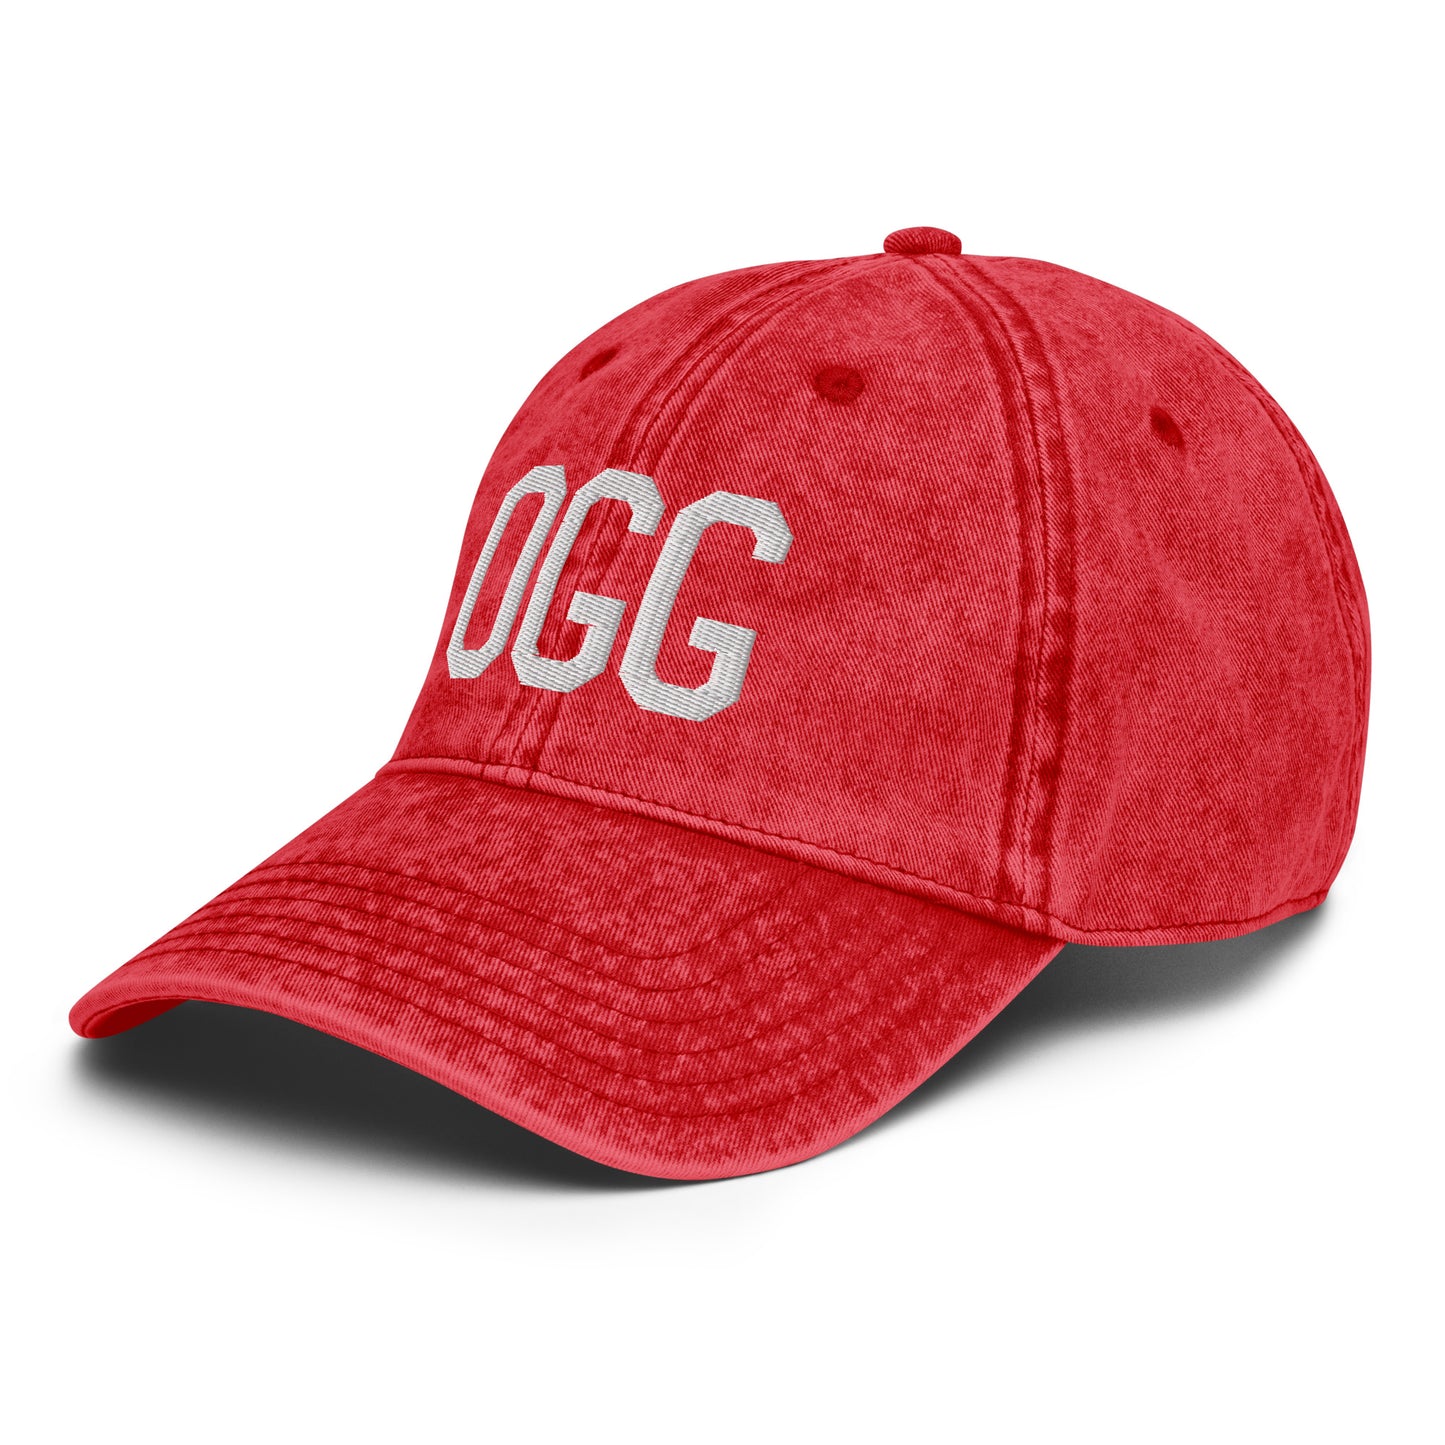 Airport Code Twill Cap - White • OGG Maui • YHM Designs - Image 23